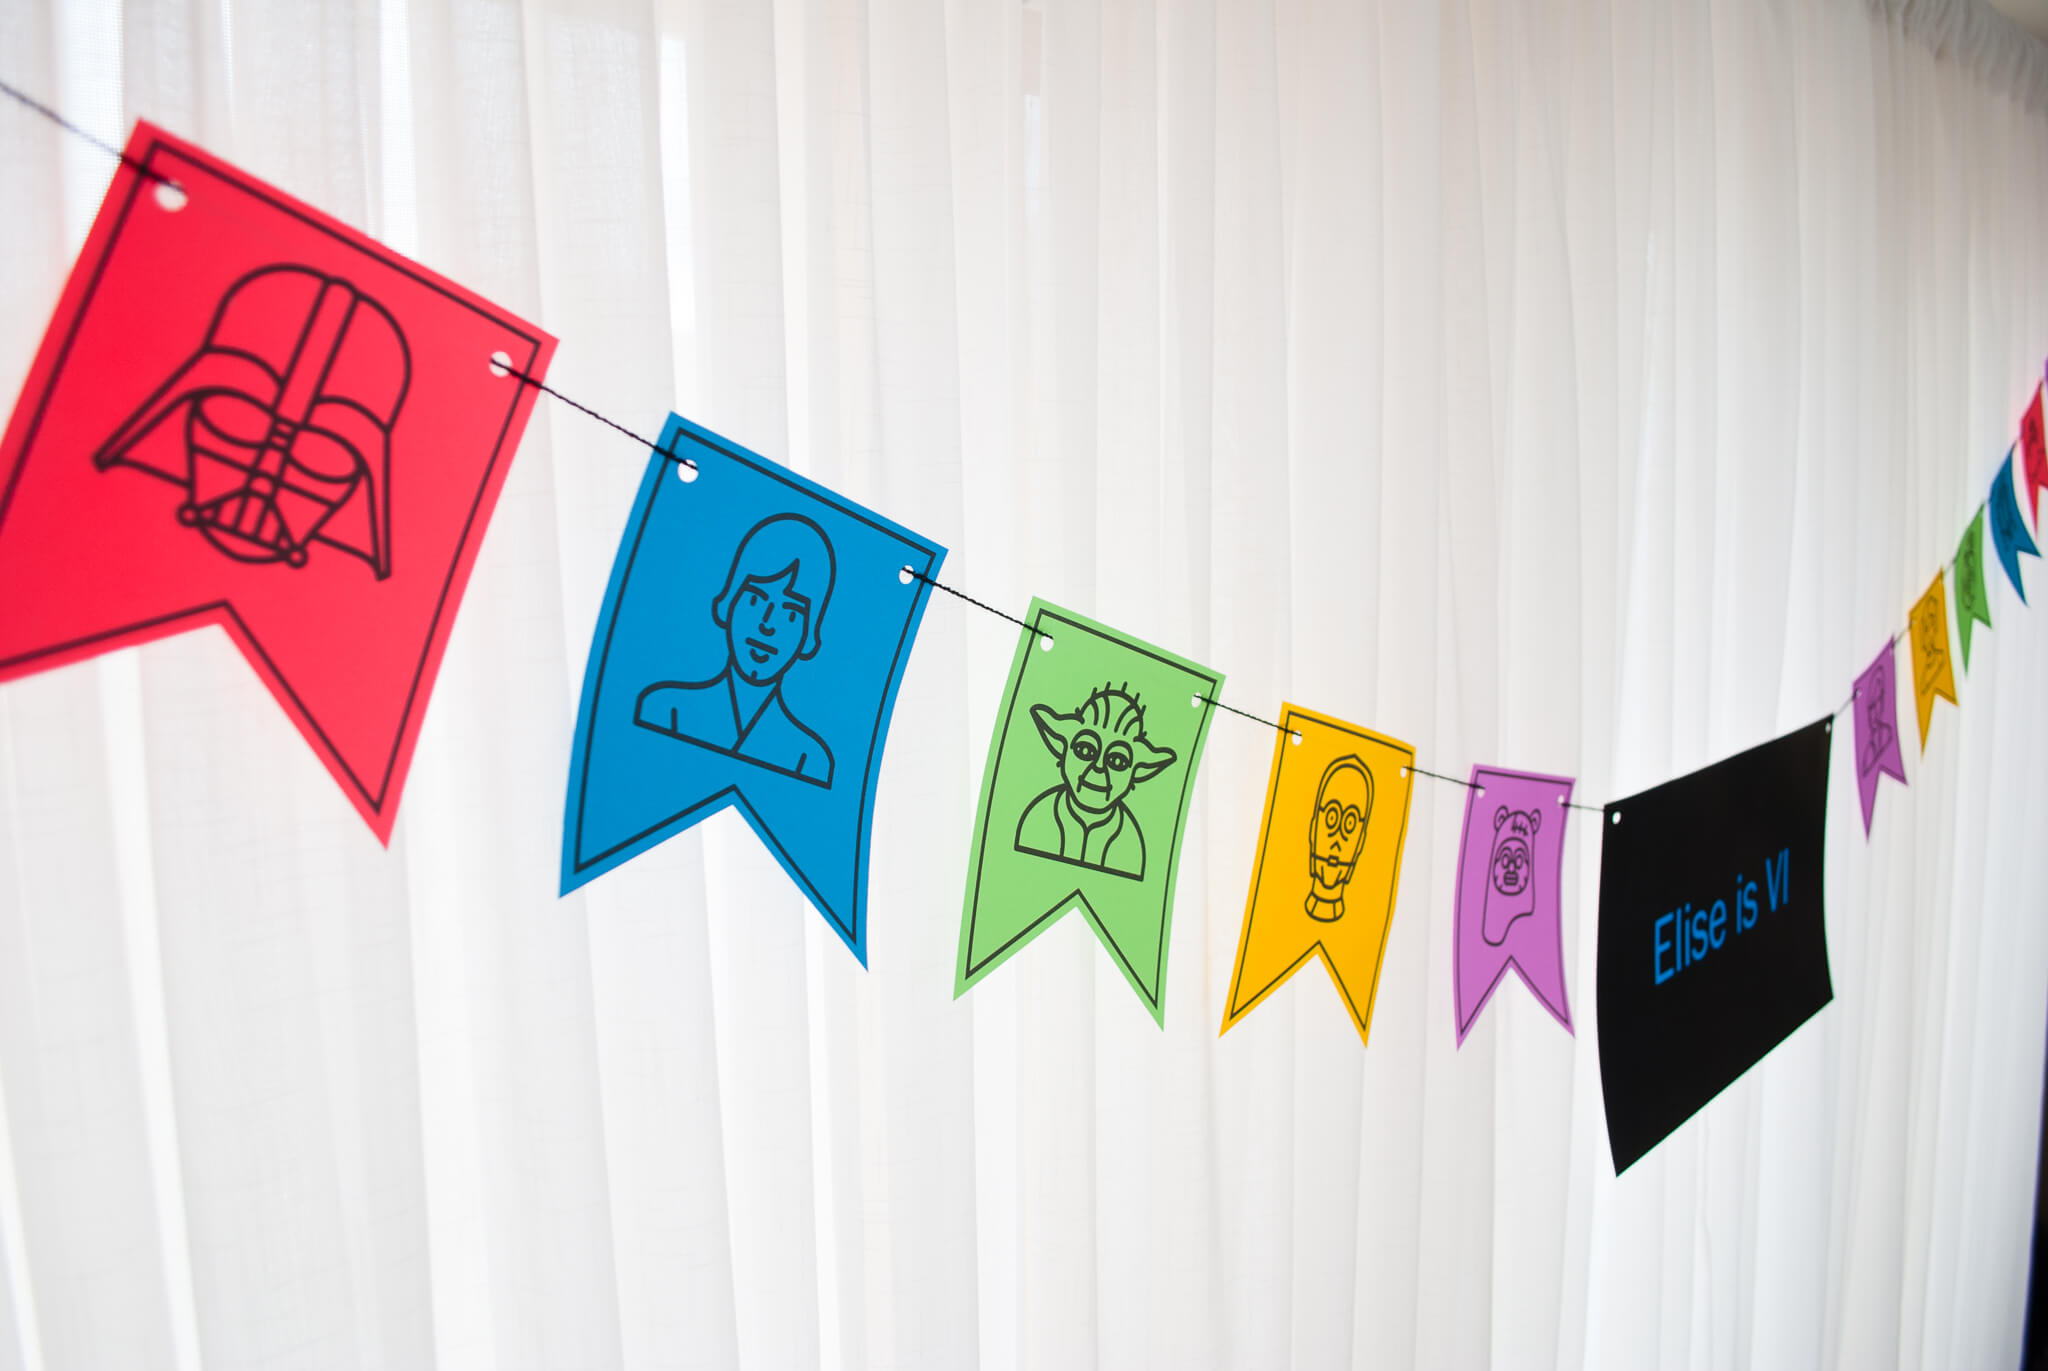 Star Wars Party Decorations Printable Birthday Banner in Lightsaber